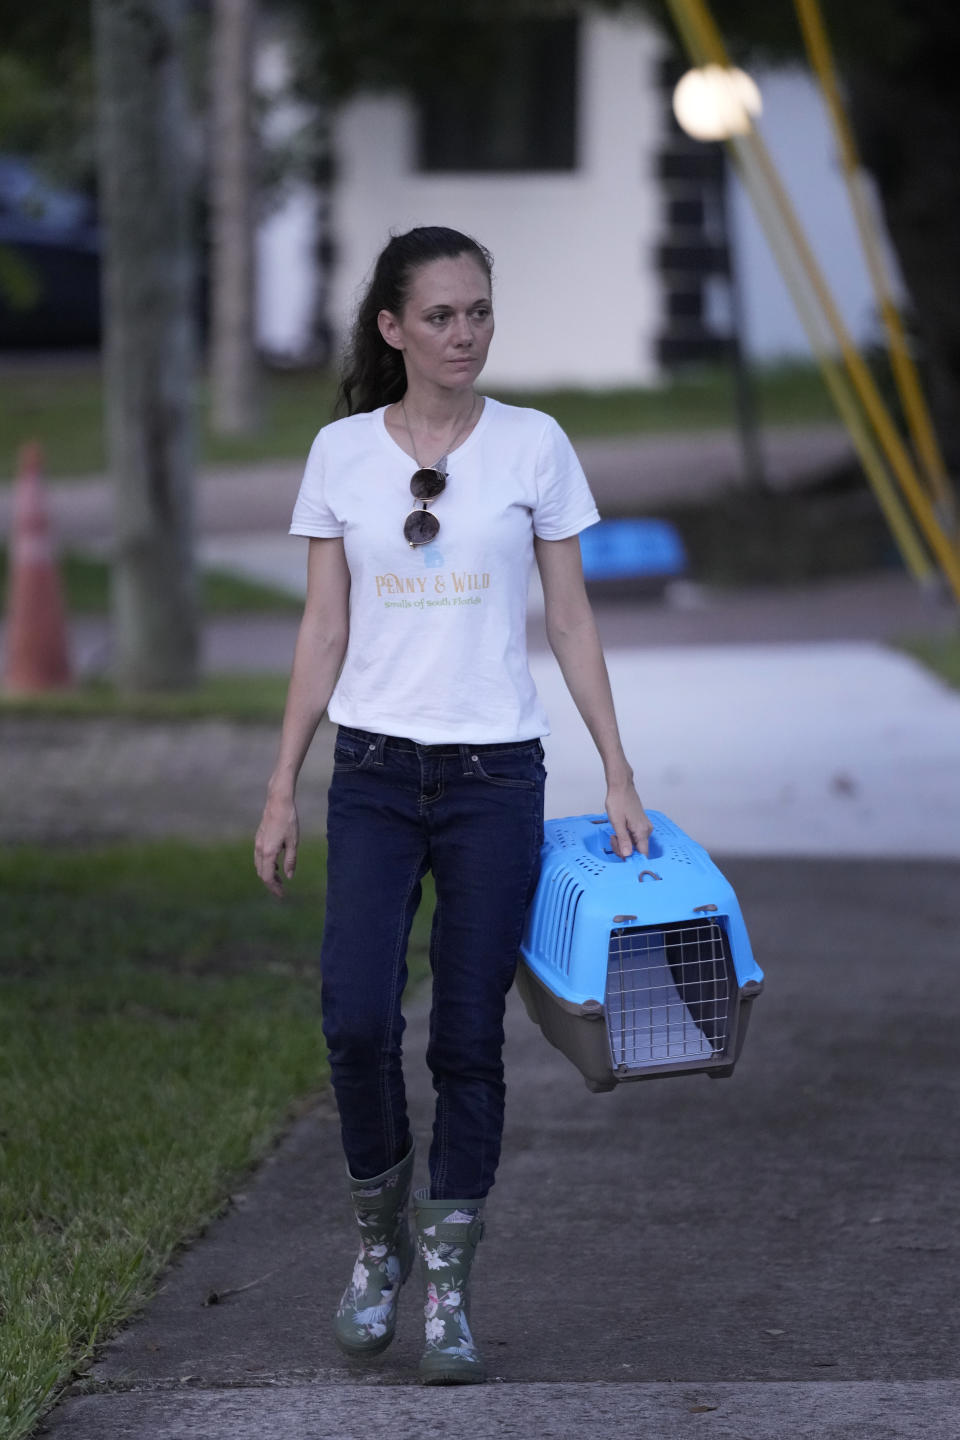 Kristina Gertser, with the rescue group Penny & Wild Smalls of South Florida, walks with a small animal crate as she attempts to capture rabbits, Thursday, July 20, 2023, in Wilton Manors, Fla. Efforts are underway to rescue the domesticated rabbits that have populated a Florida neighborhood. Rescue groups are using traps, hands and sometimes nets to capture the 60 to 100 lionhead rabbits living in a community near Fort Lauderdale. (AP Photo/Wilfredo Lee)